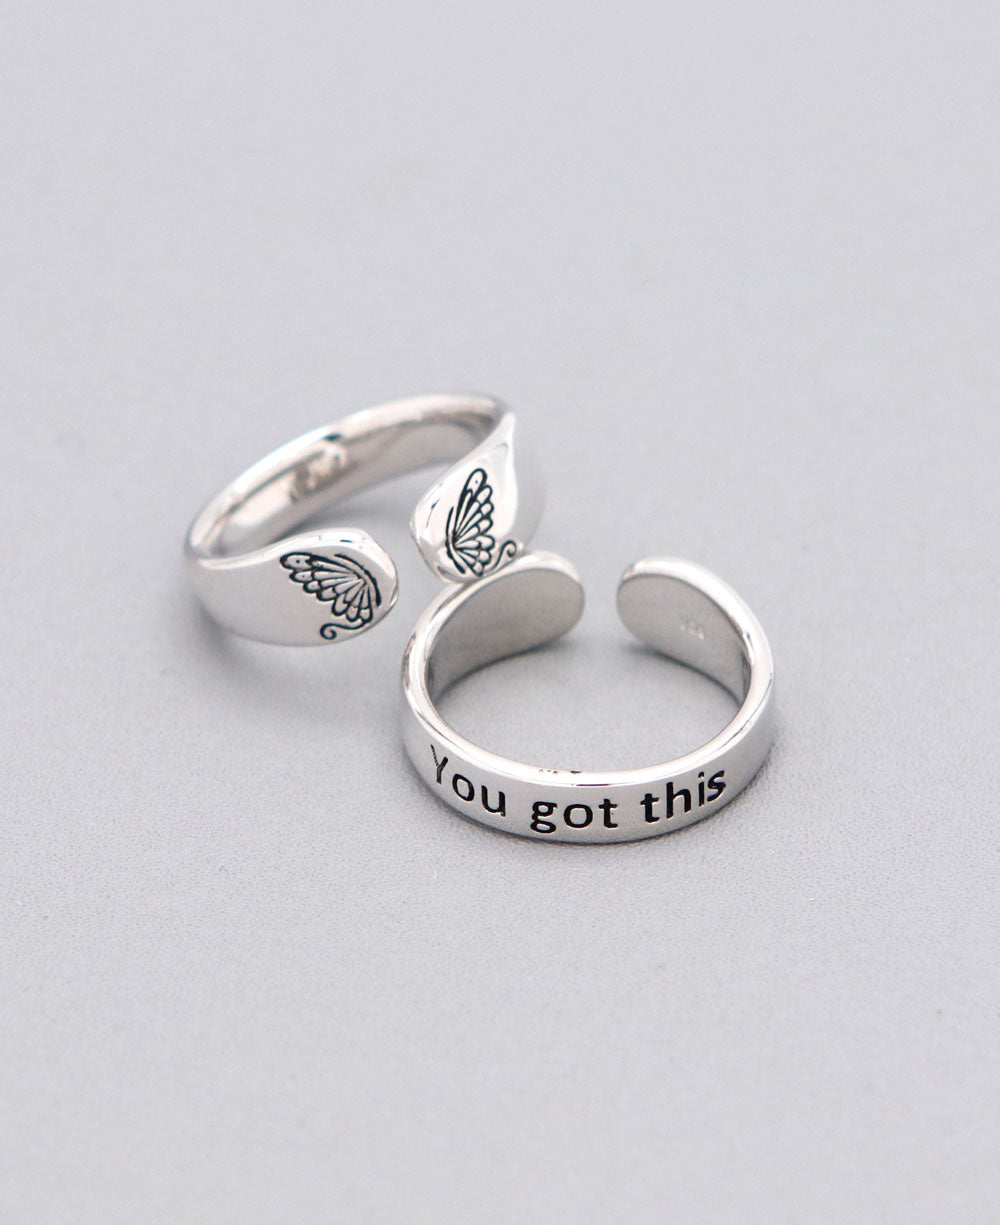 You Got This Sterling Silver Adjustable Inspirational Ring - Rings